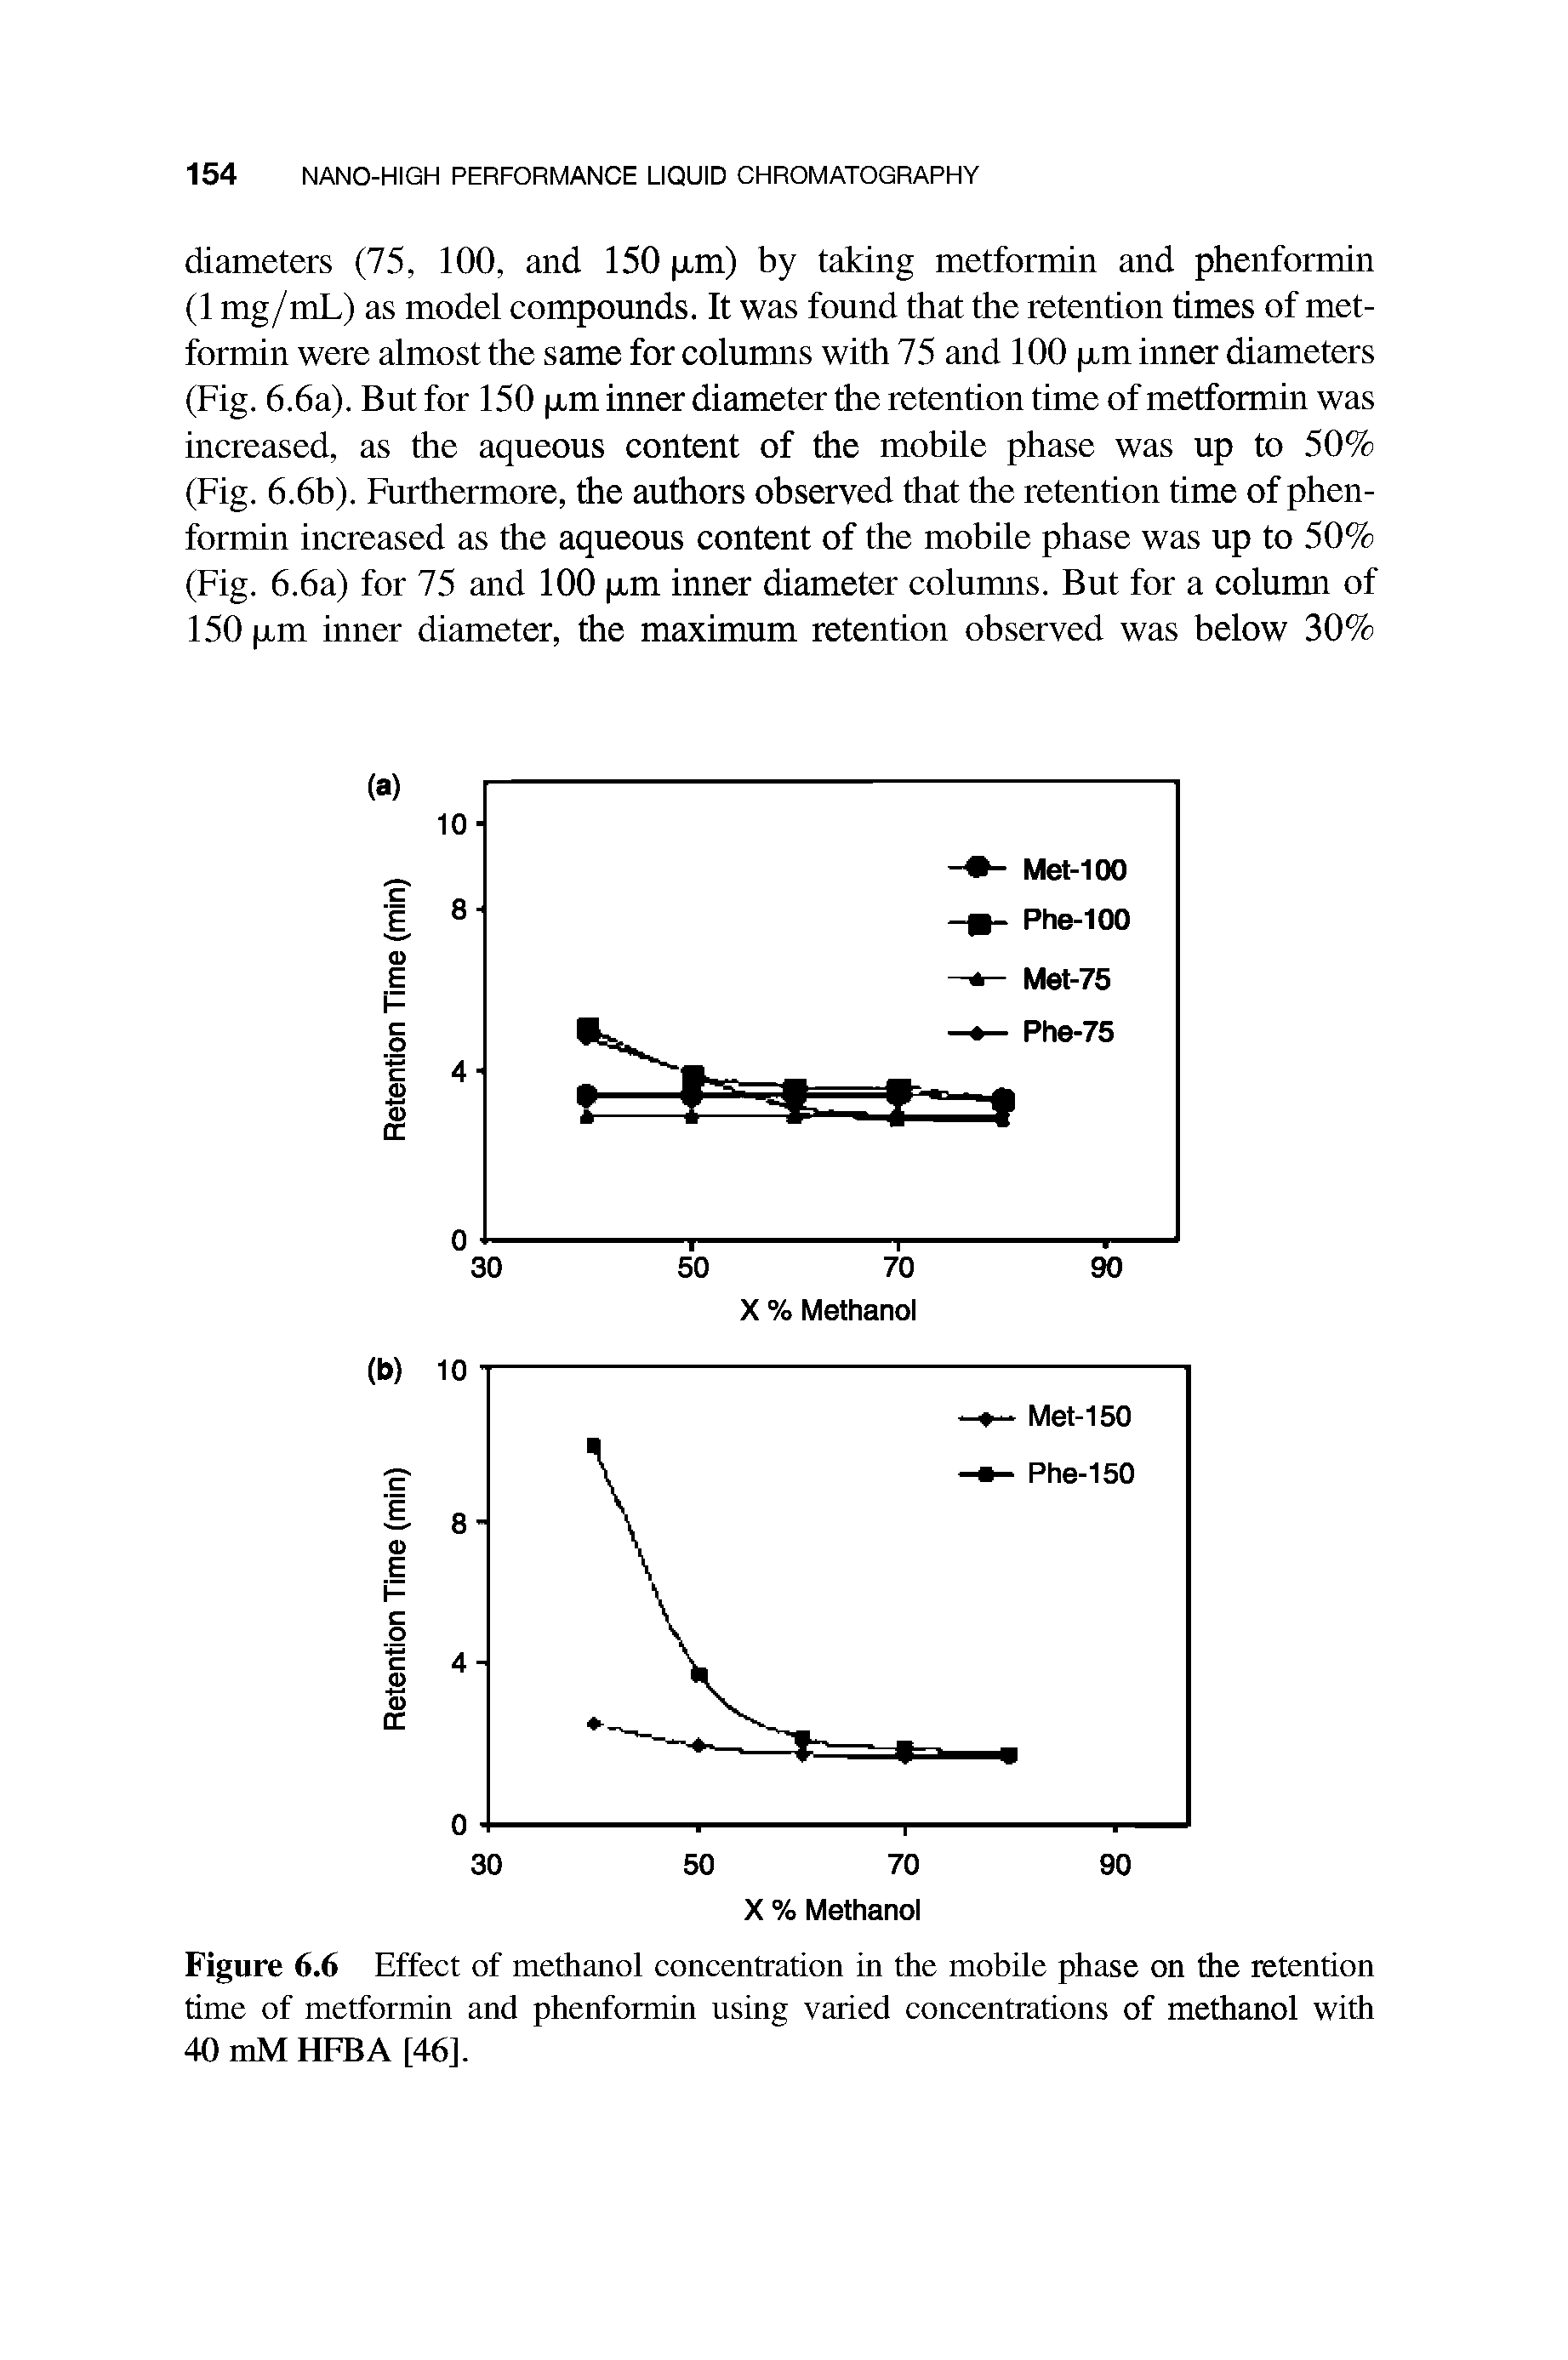 Figure 6.6 Effect of methanol concentration in the mobile phase on the retention time of metformin and phenformin using varied concentrations of methanol with 40 mM HFBA [46].